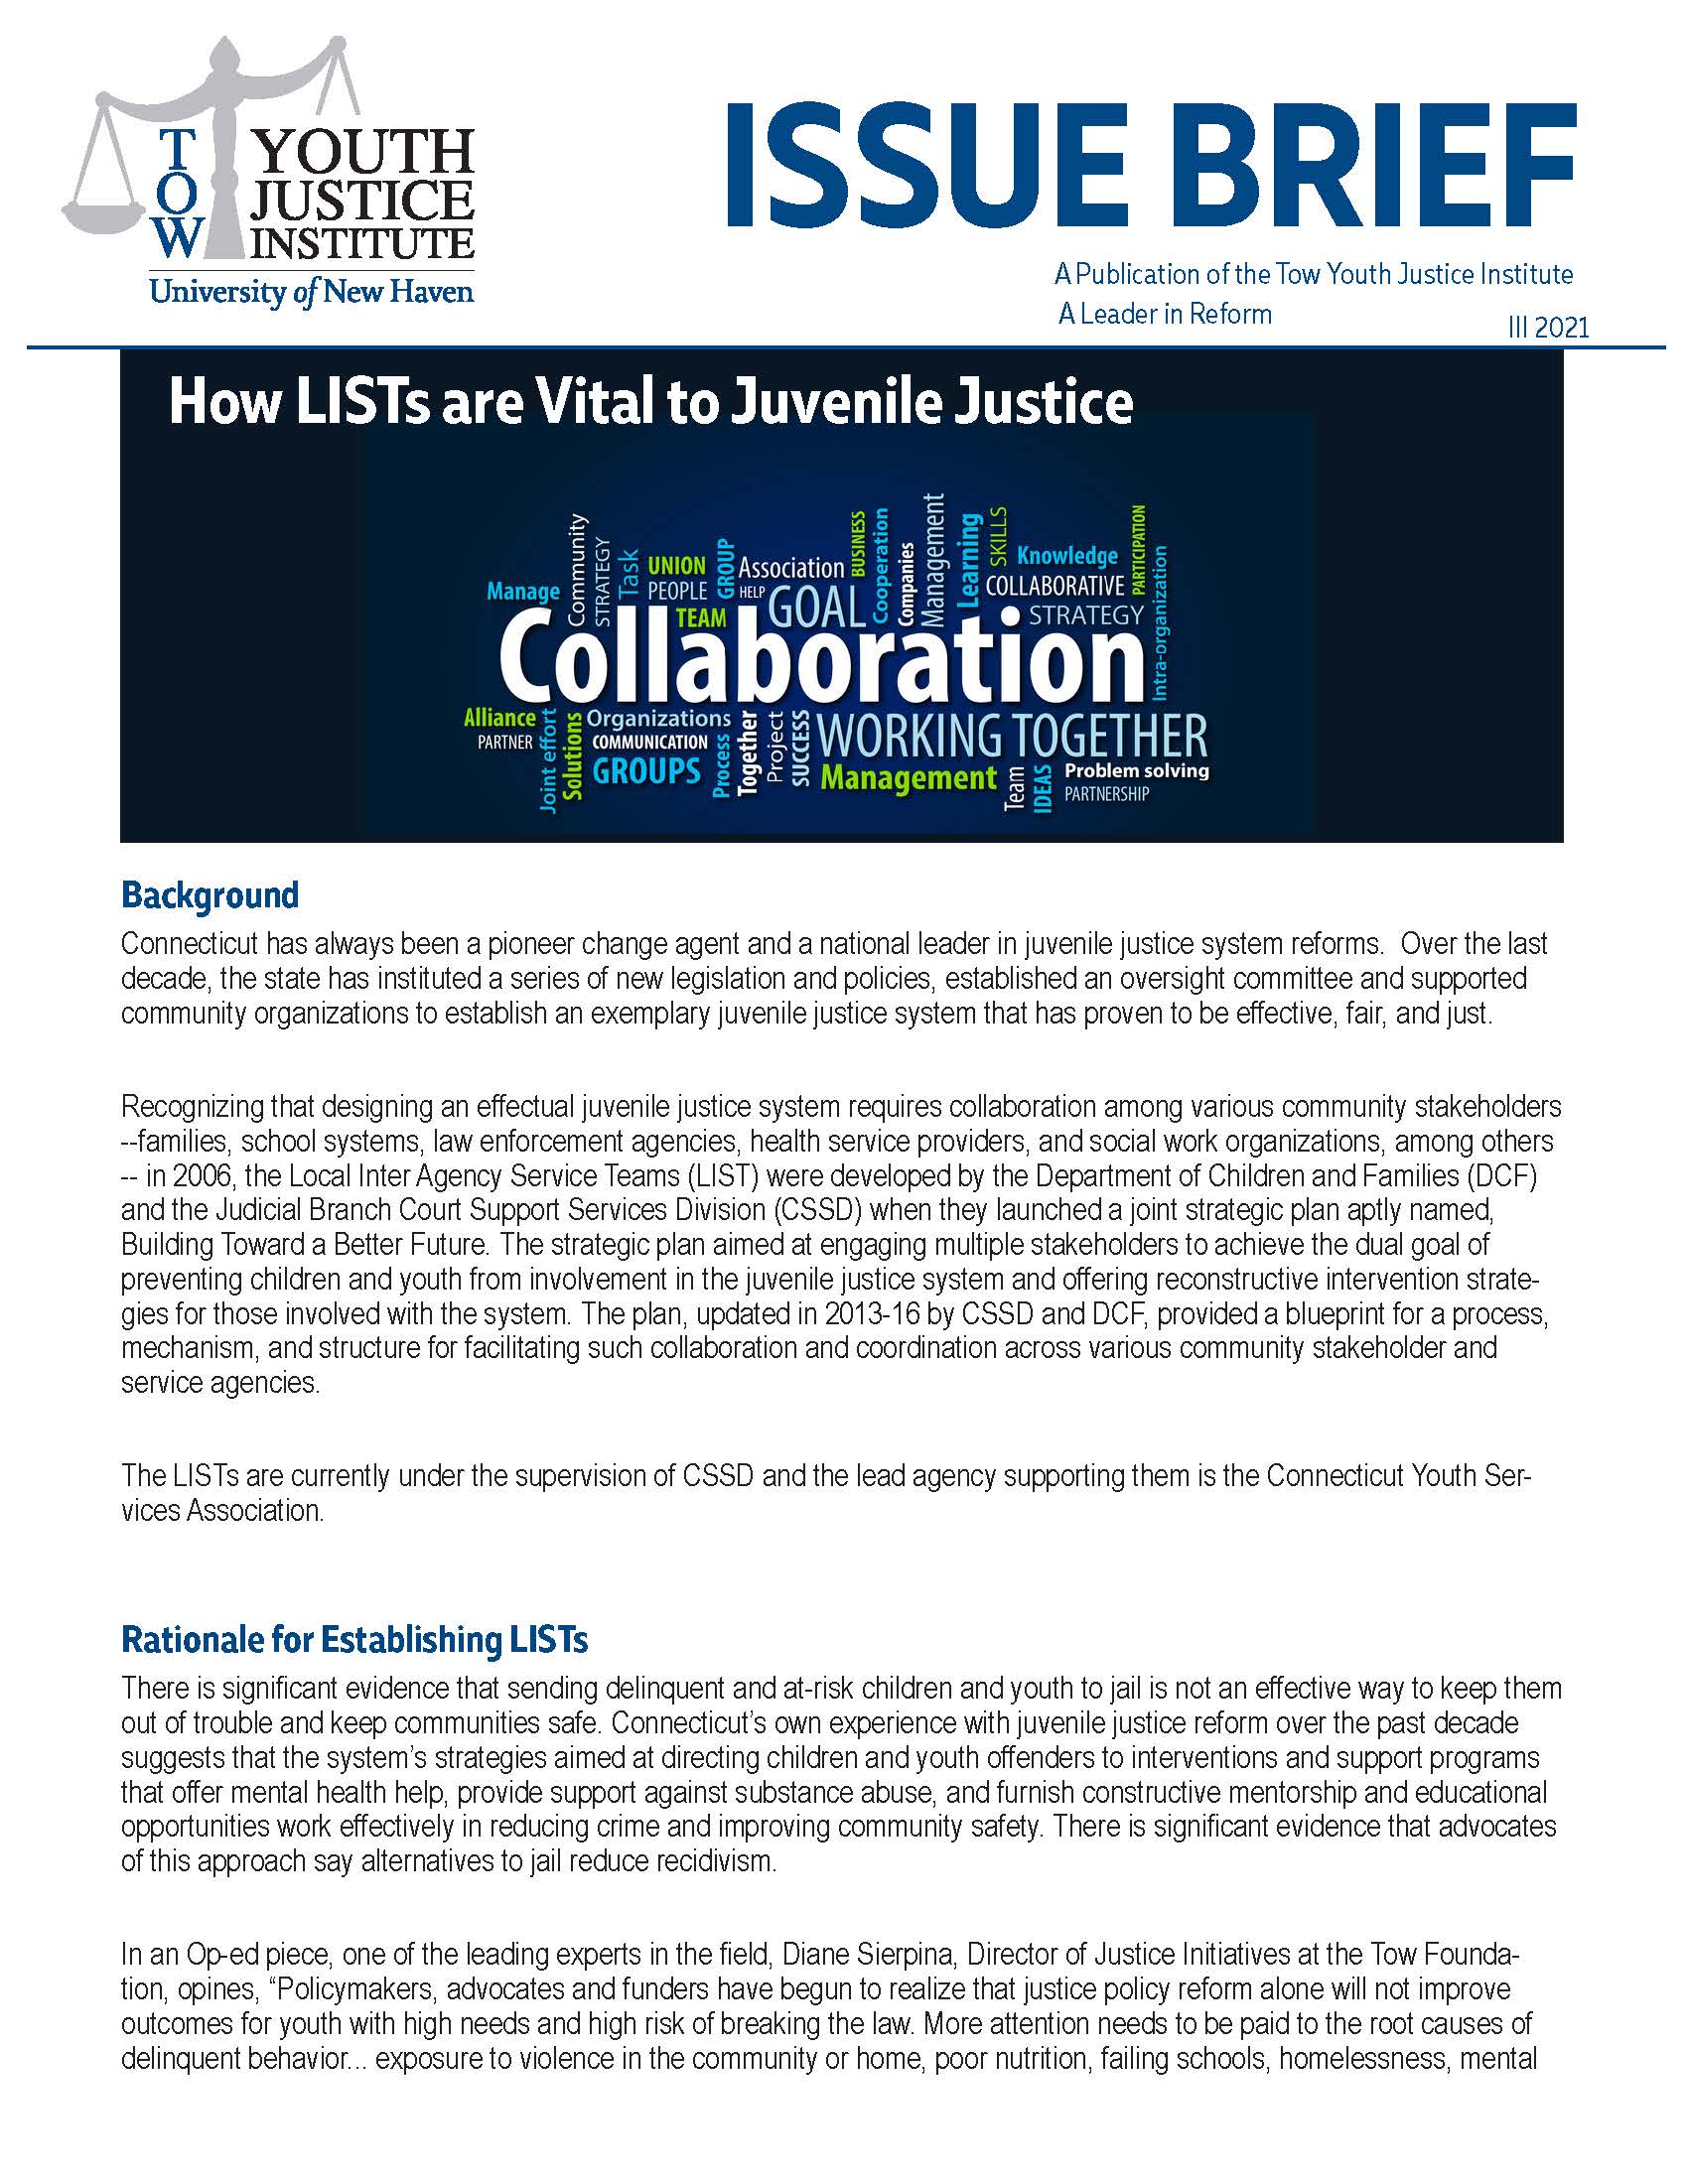 How LISTs are Vital to Juvenile Justice